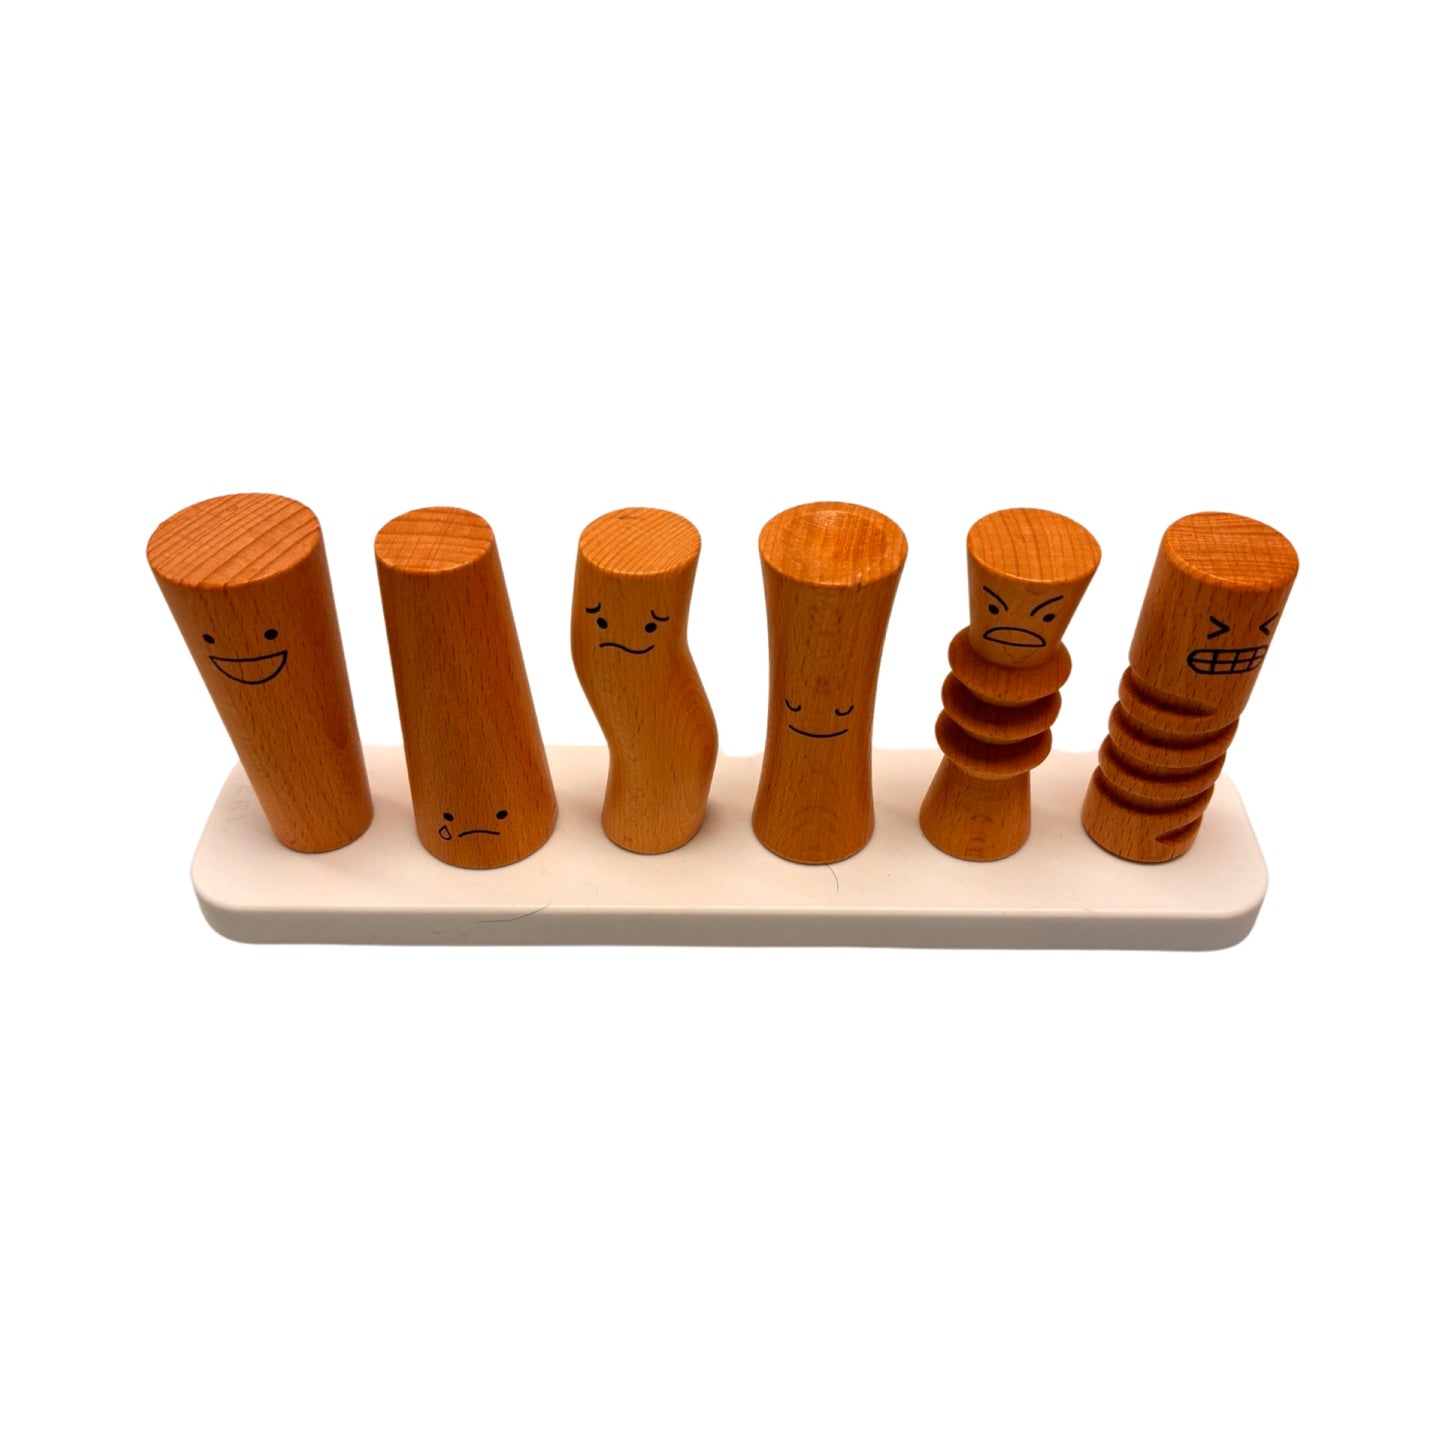 Lovevery Wooden Emotions Peg Toy